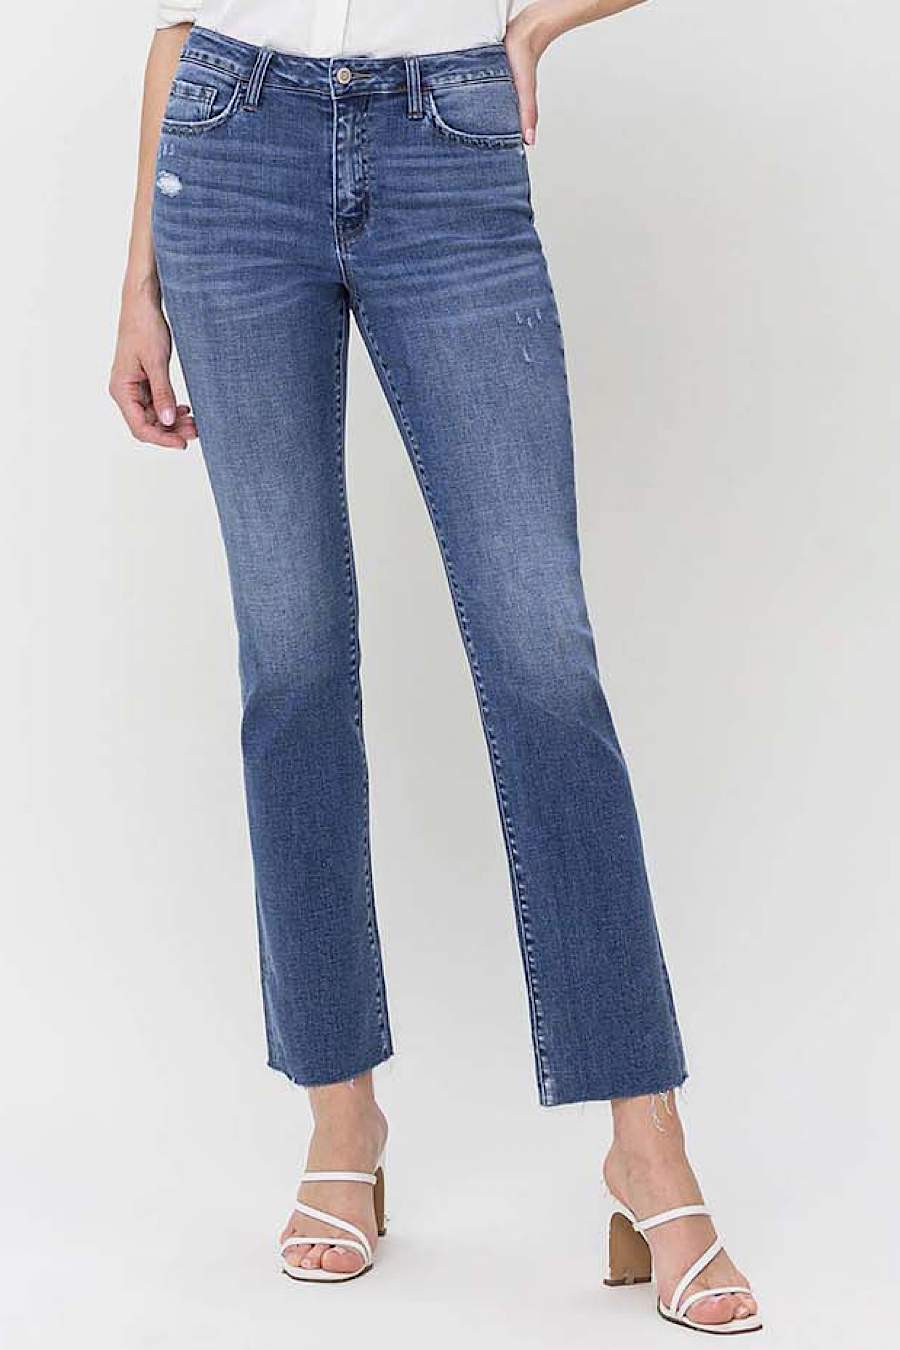 FM Prudent Straight Jeans